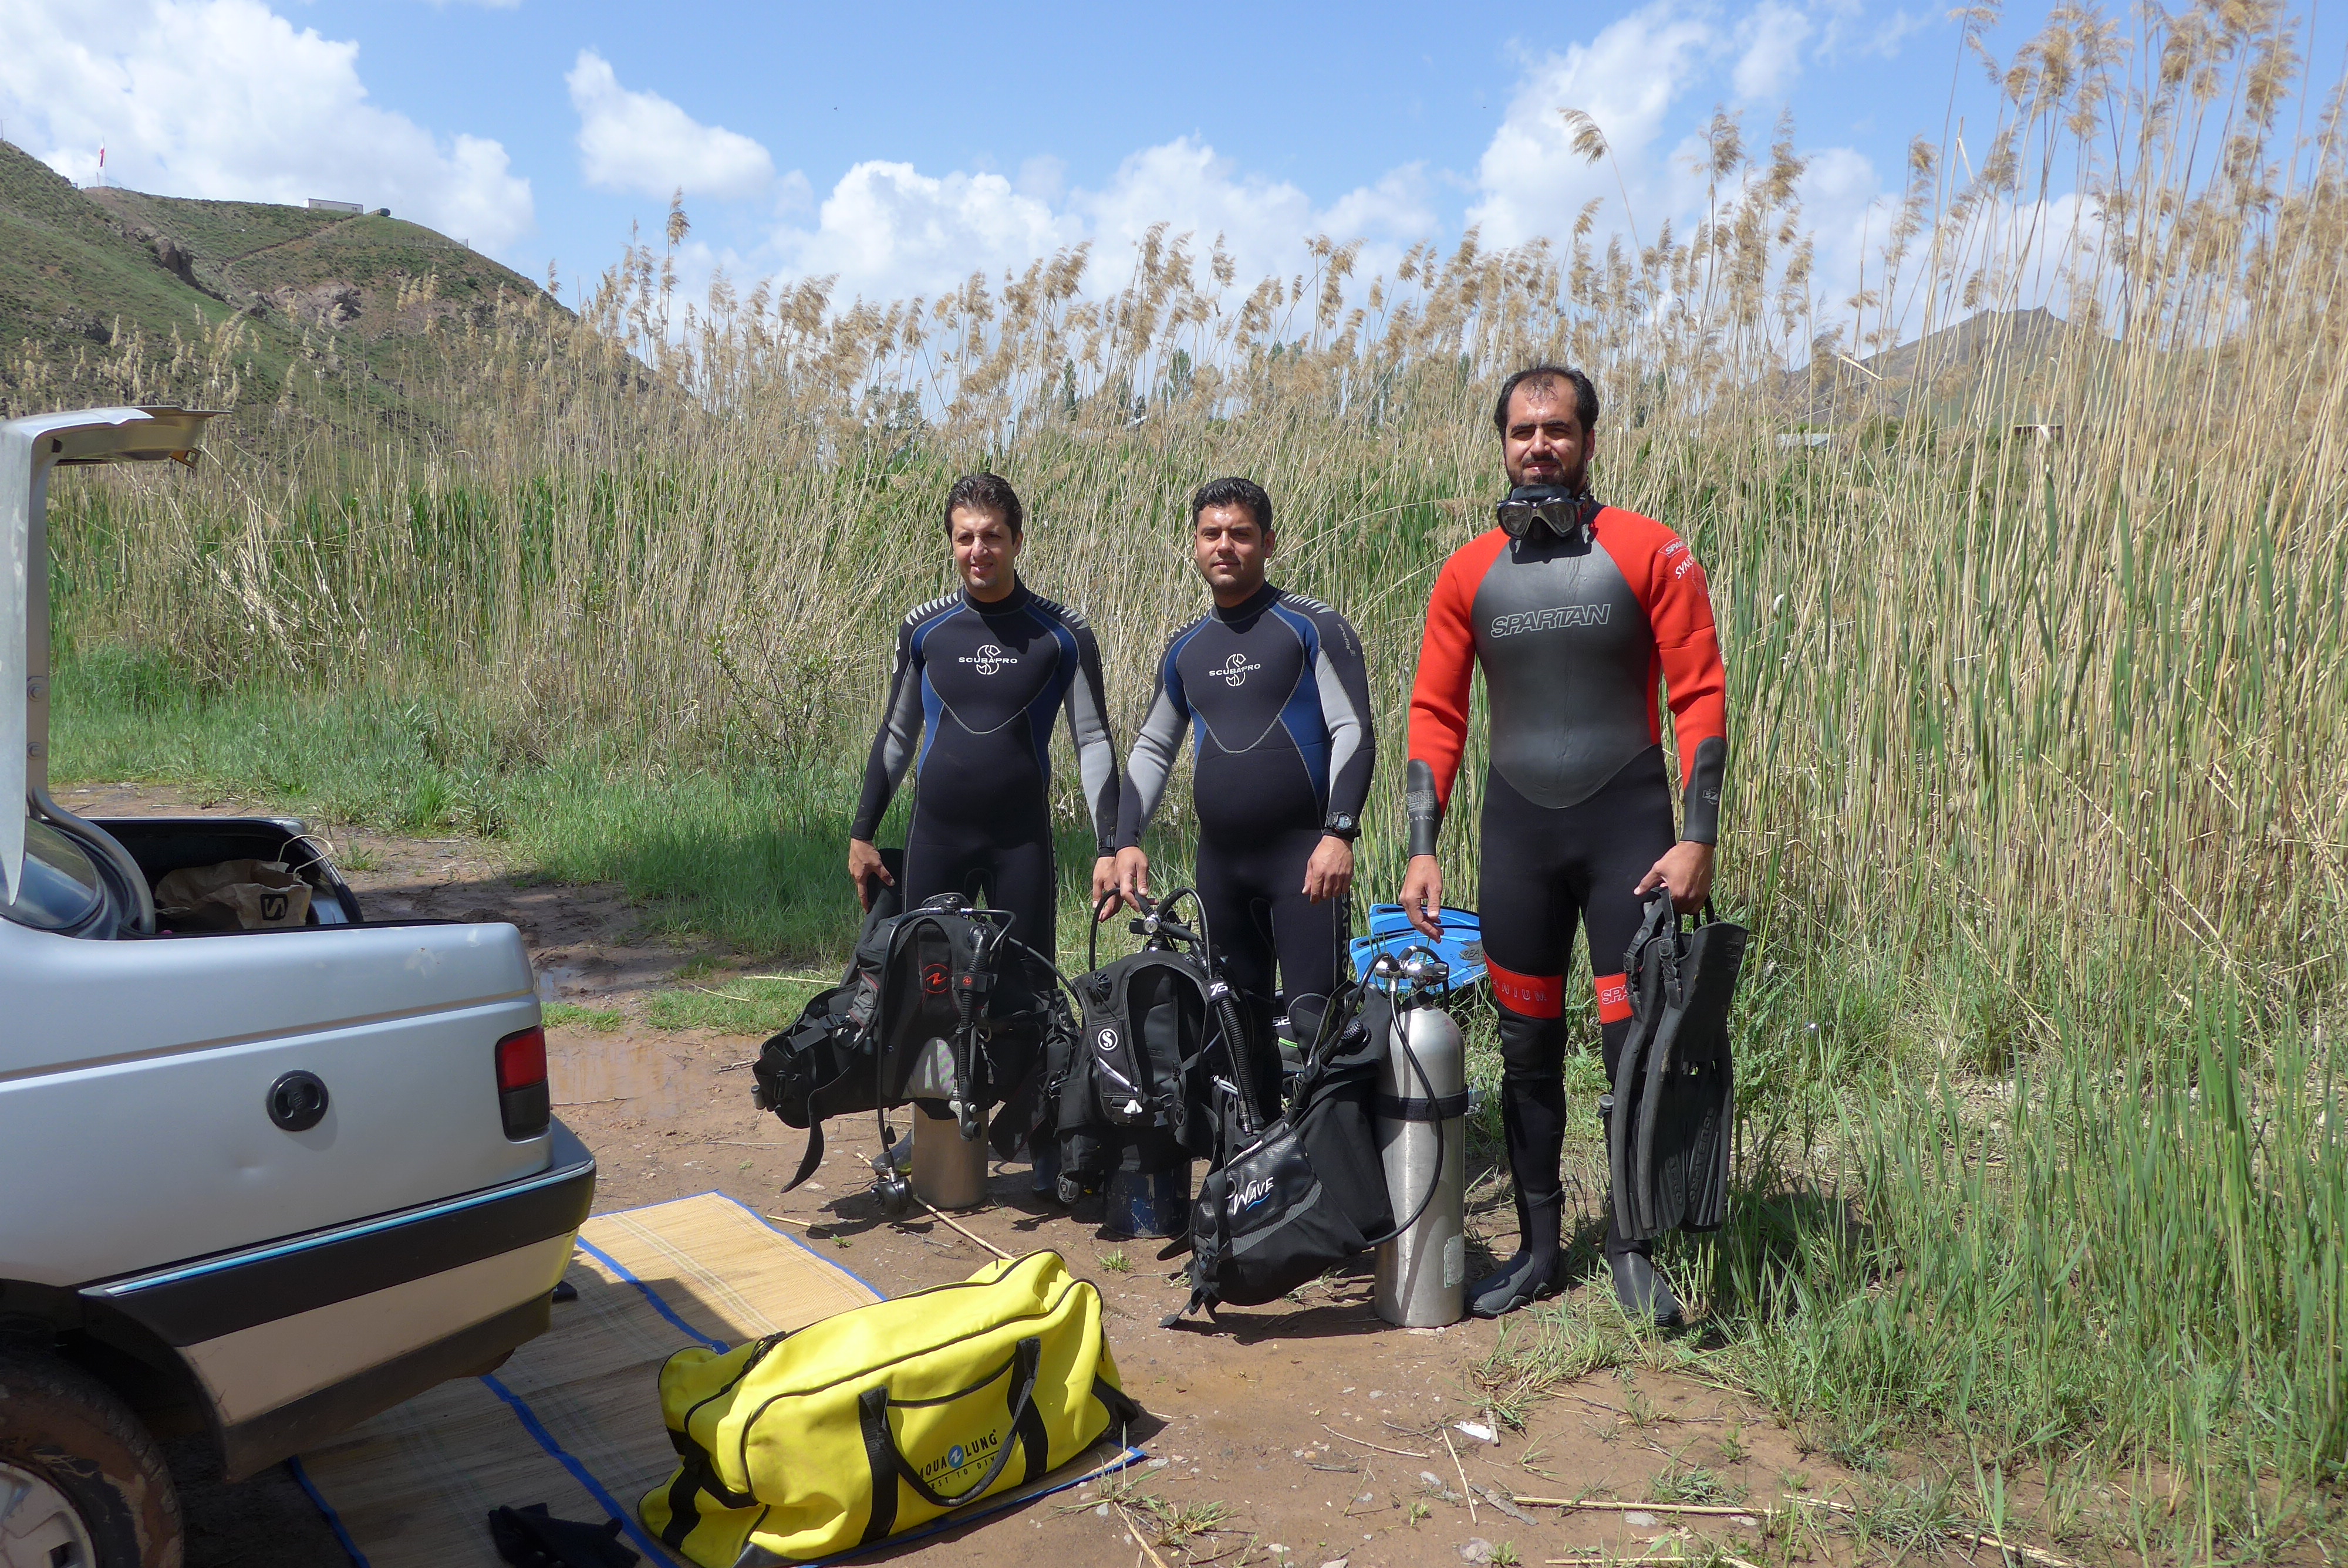 ... for example when you meet three divers in the middle of the mountains! :O